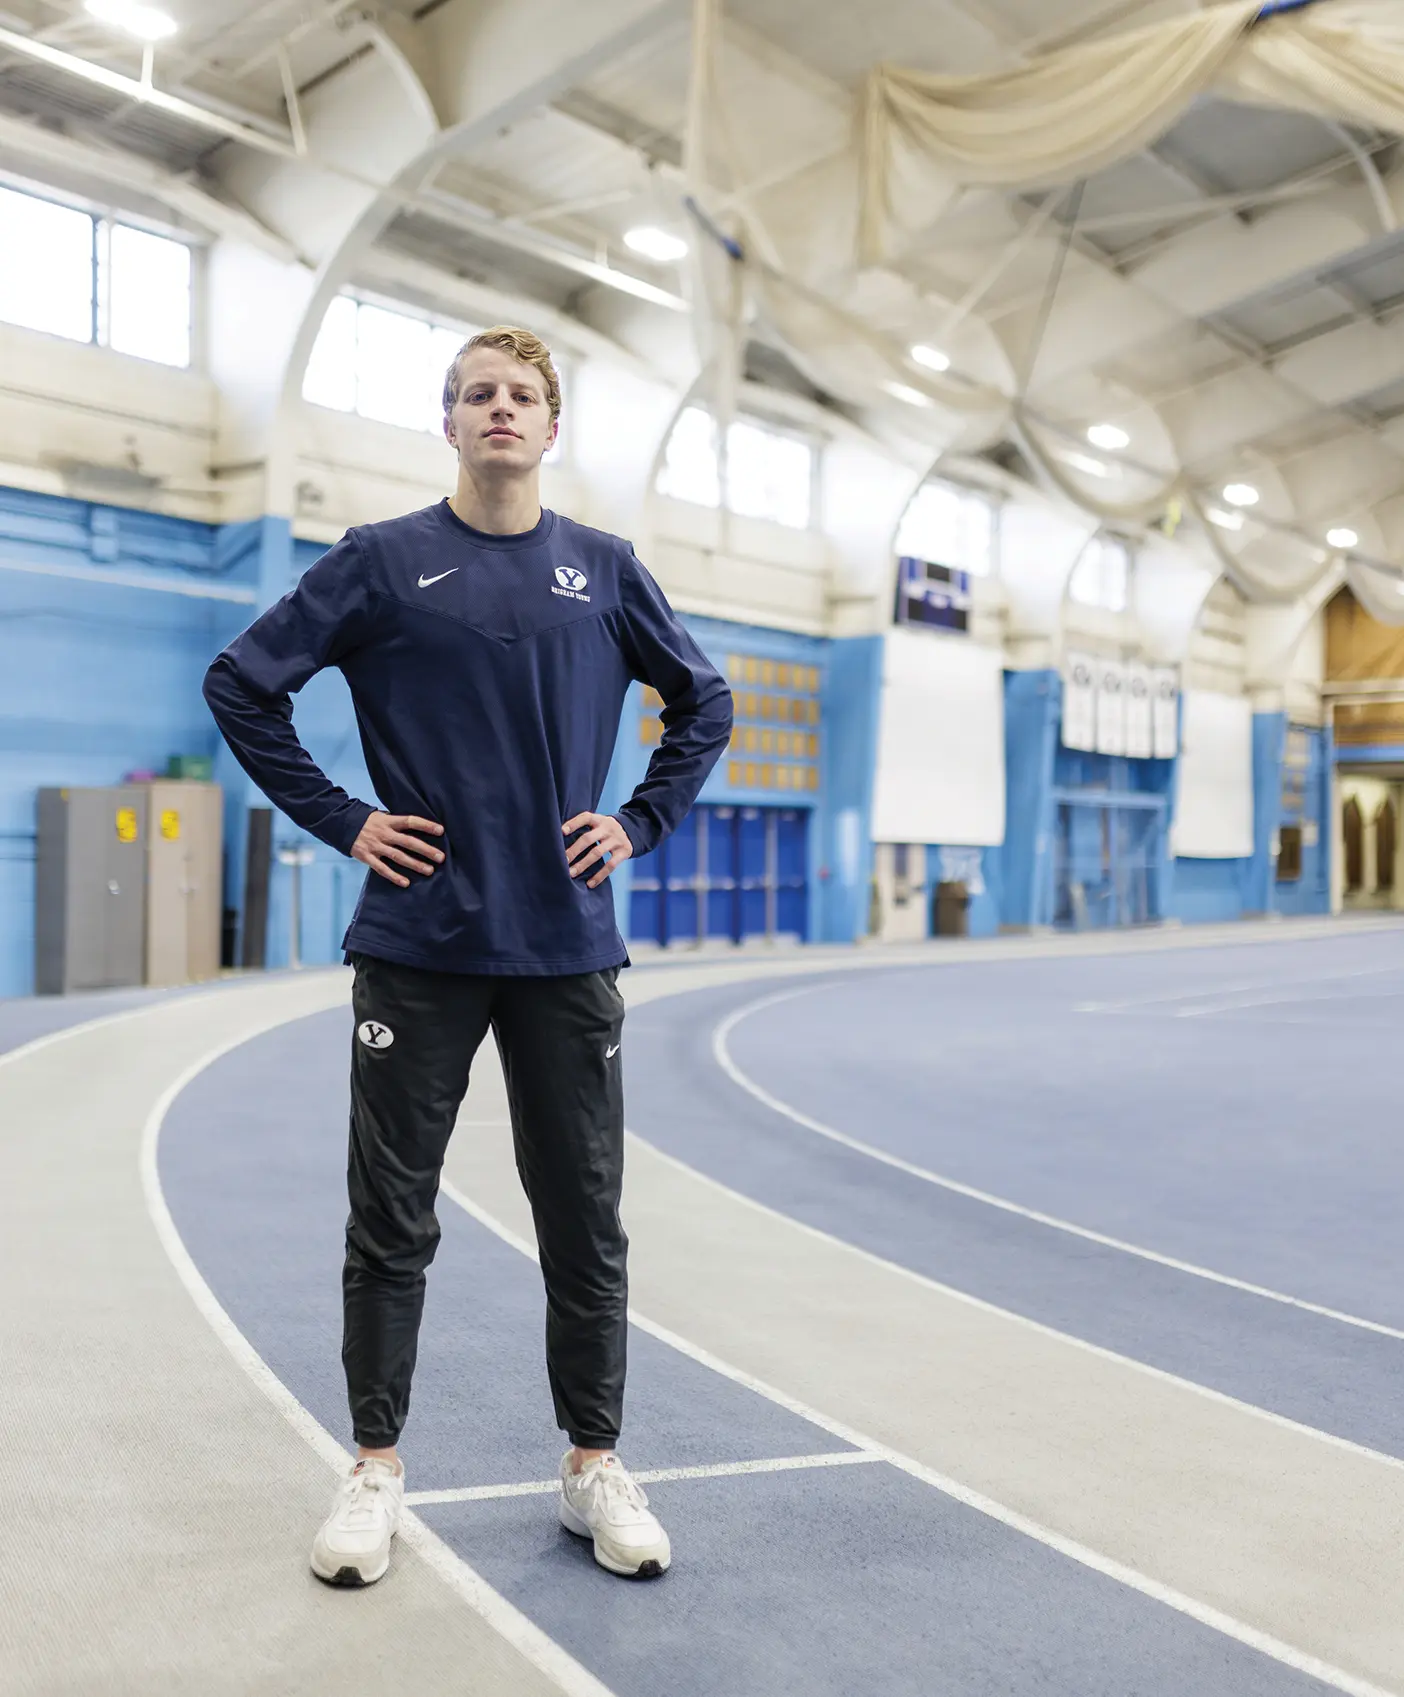 Aidan Troutner stands on the track indoors with hands on hips, looking triumphantly at the camera.